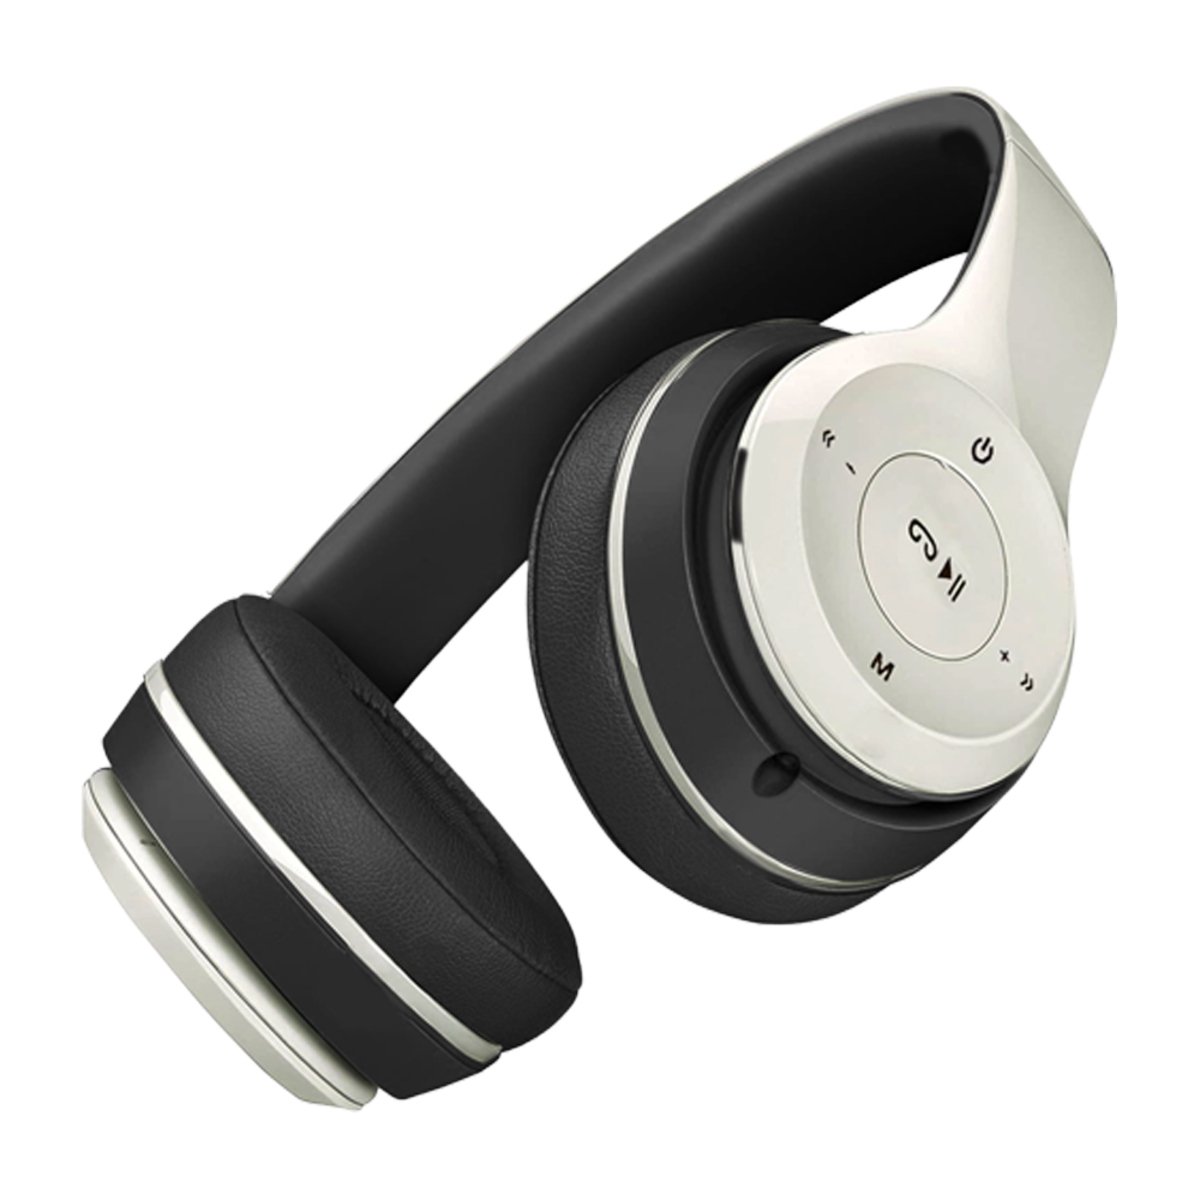 Iends Wireless Headphone Bluetooth Over-Ear Foldable Headset with Microphone V30 (Assorted Colours)